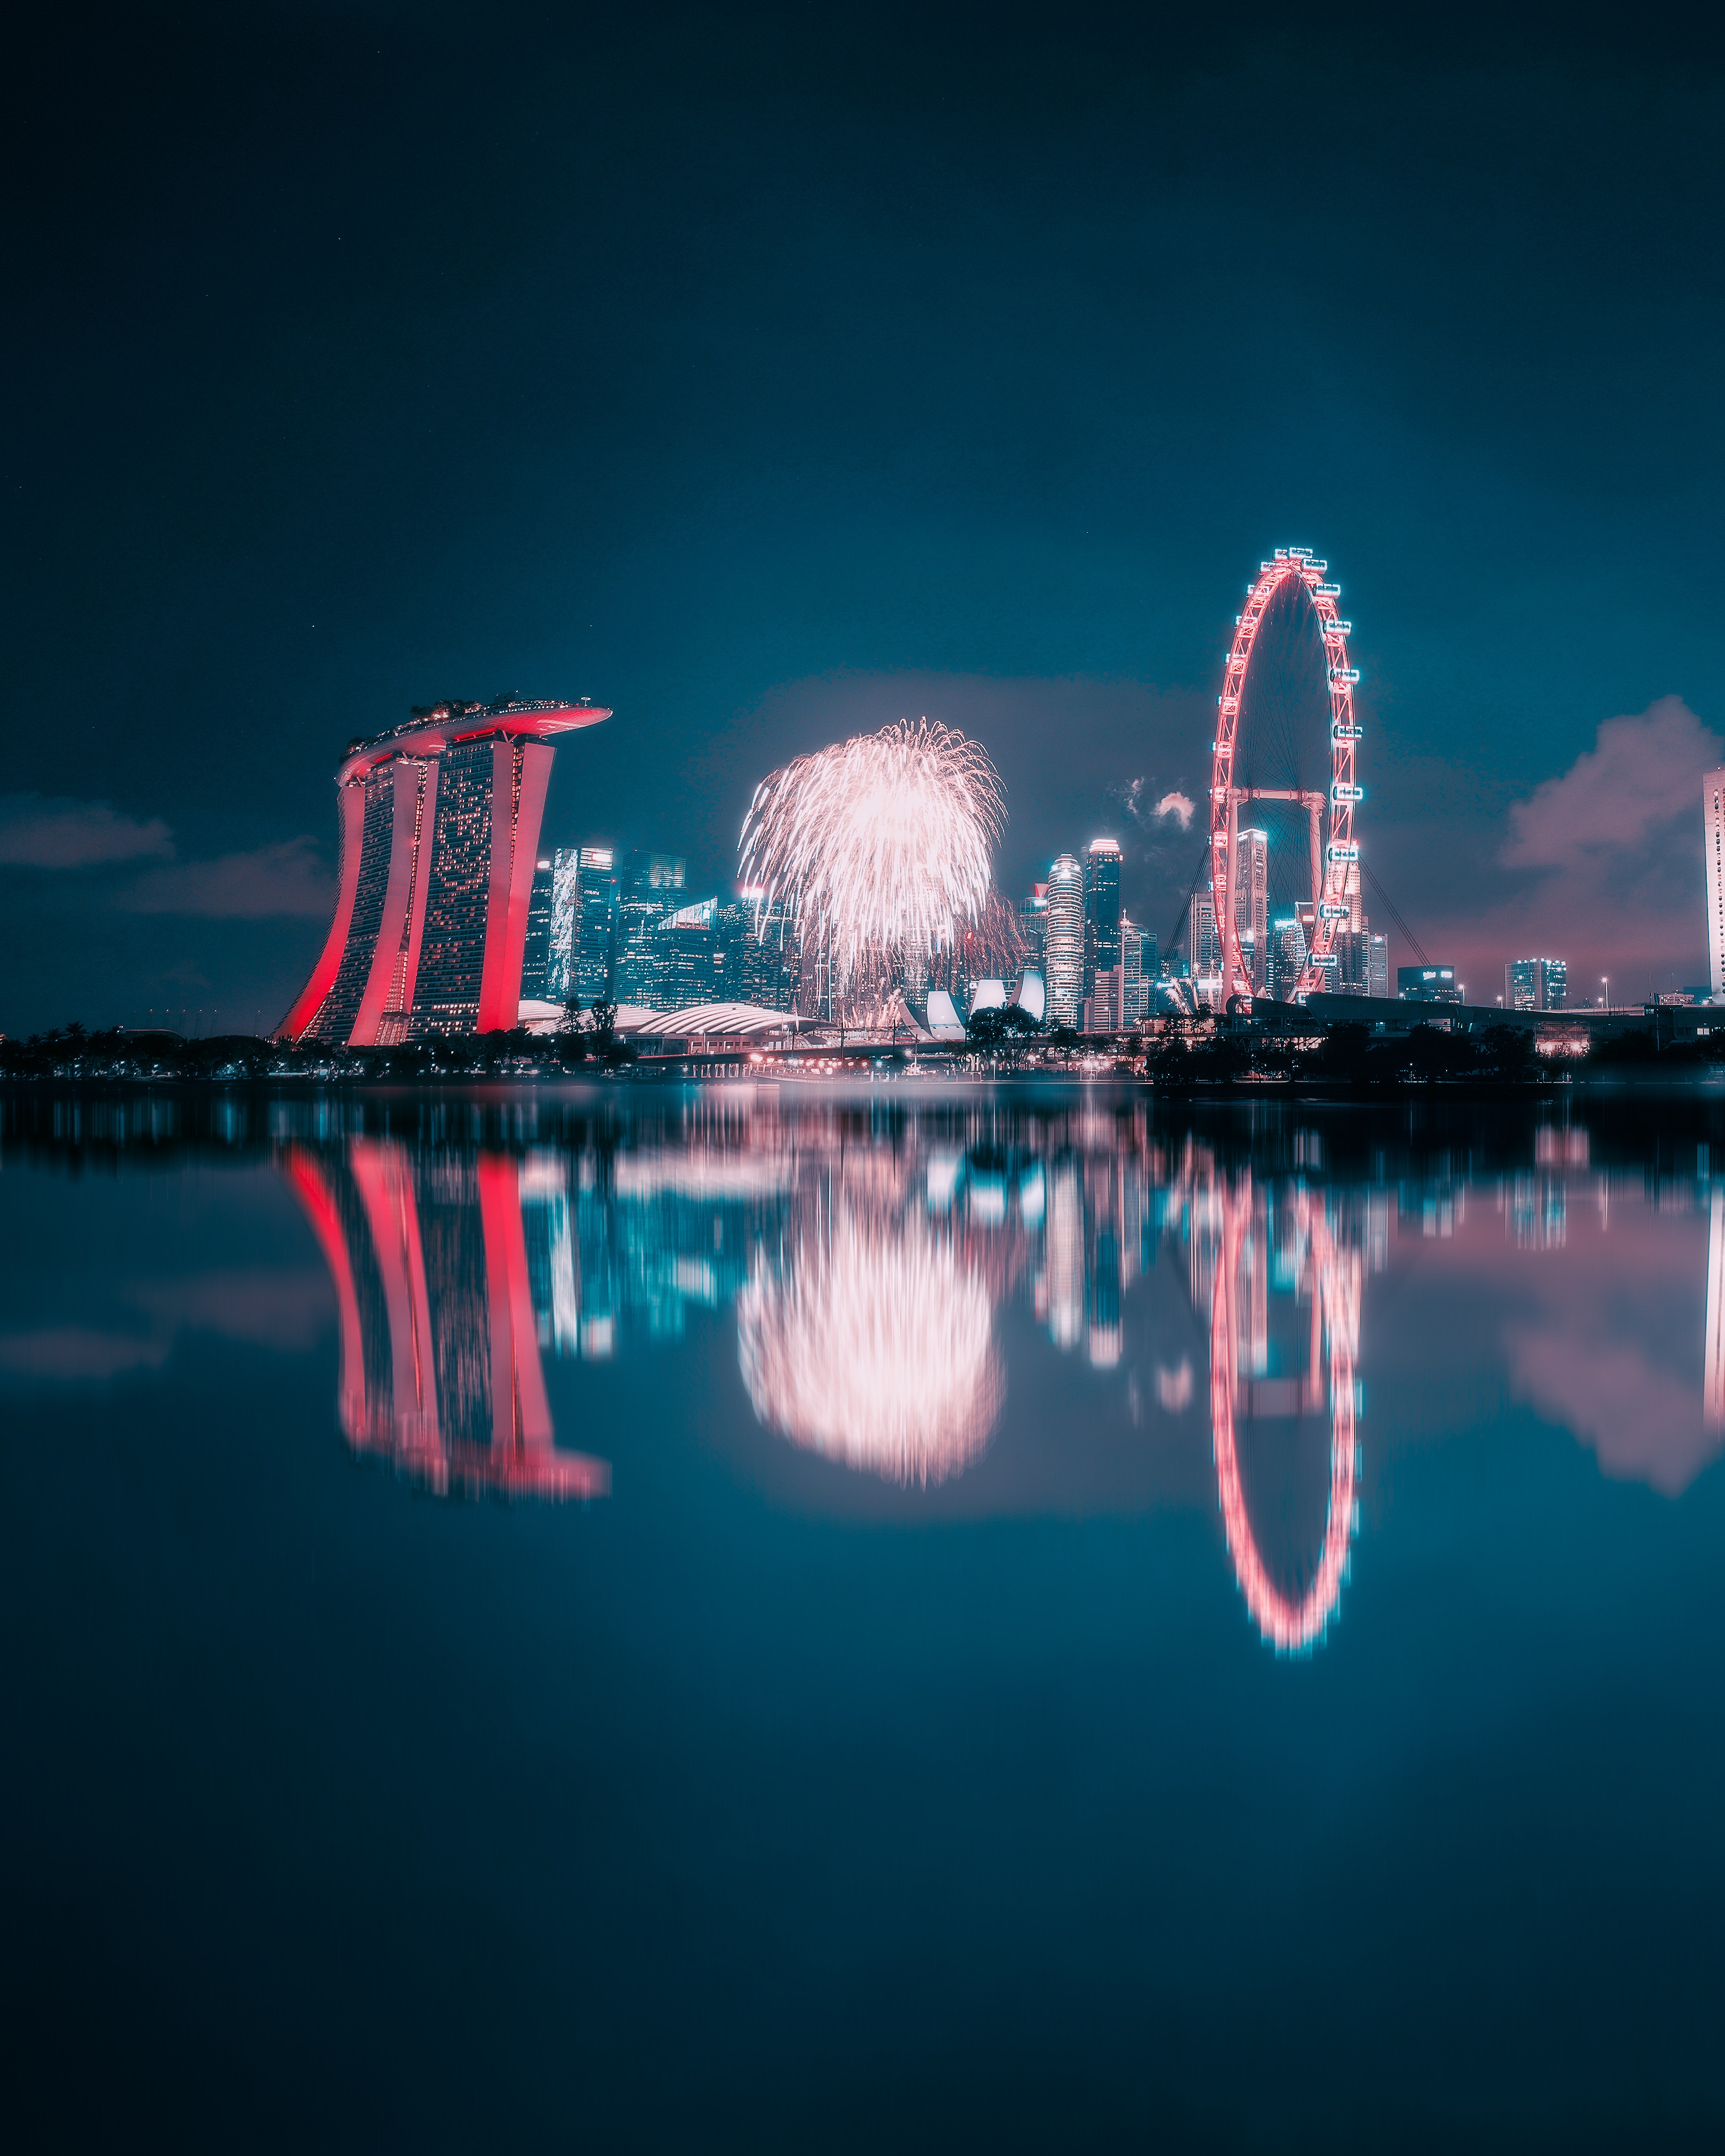 night city, cities, water, building, reflection, fireworks, firework cellphone